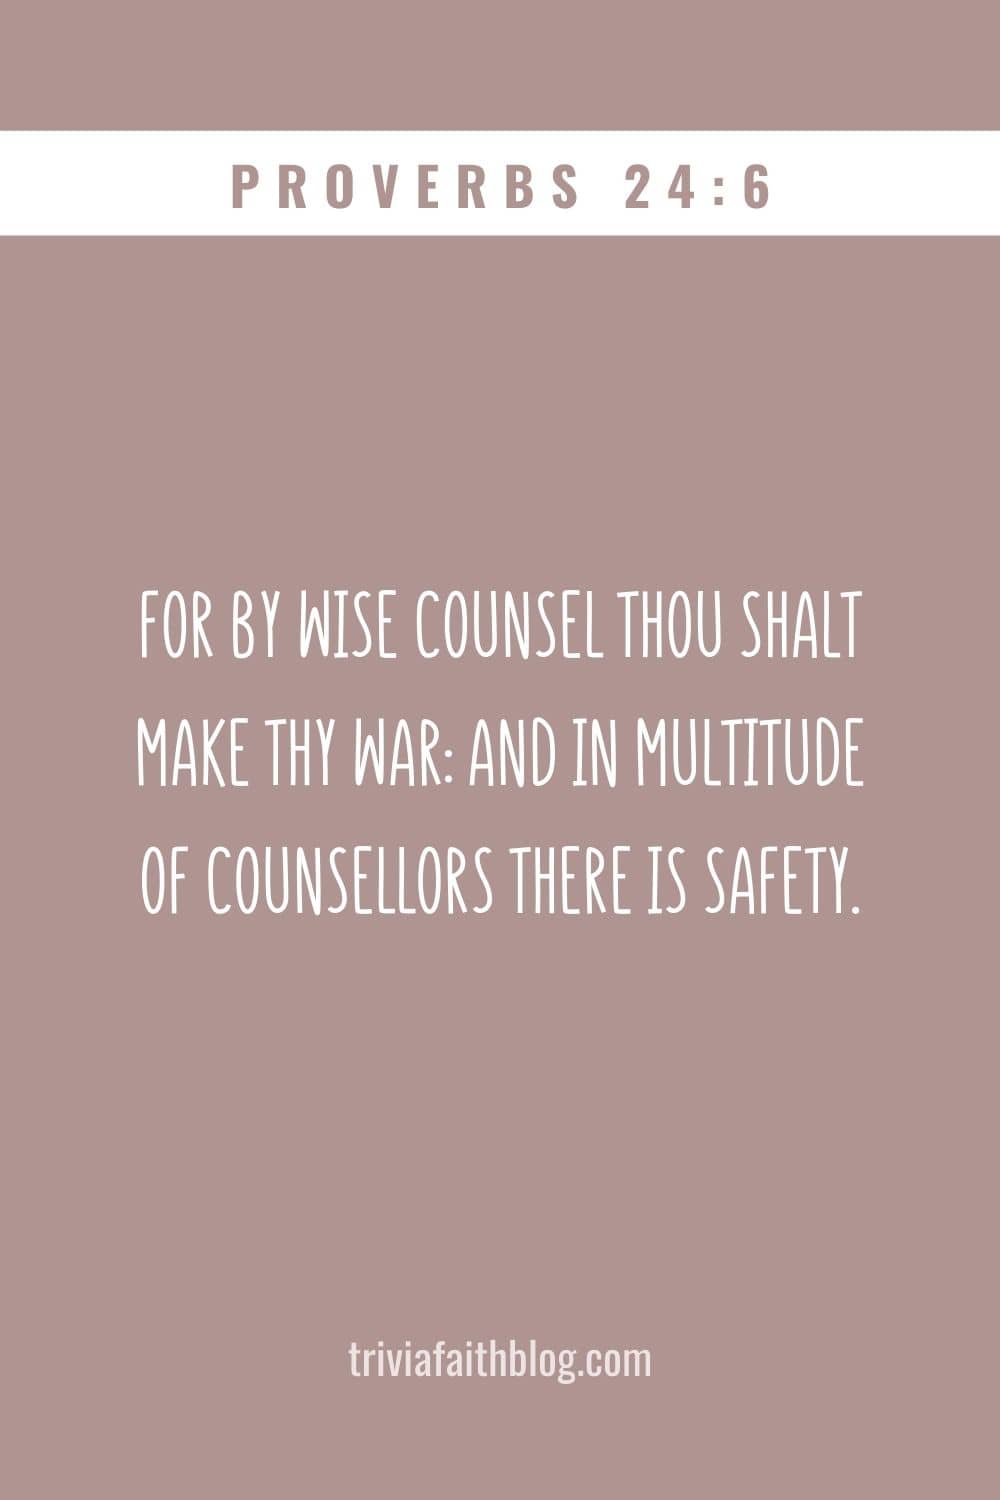 For by wise counsel thou shalt make thy war and in multitude of counsellors there is safety